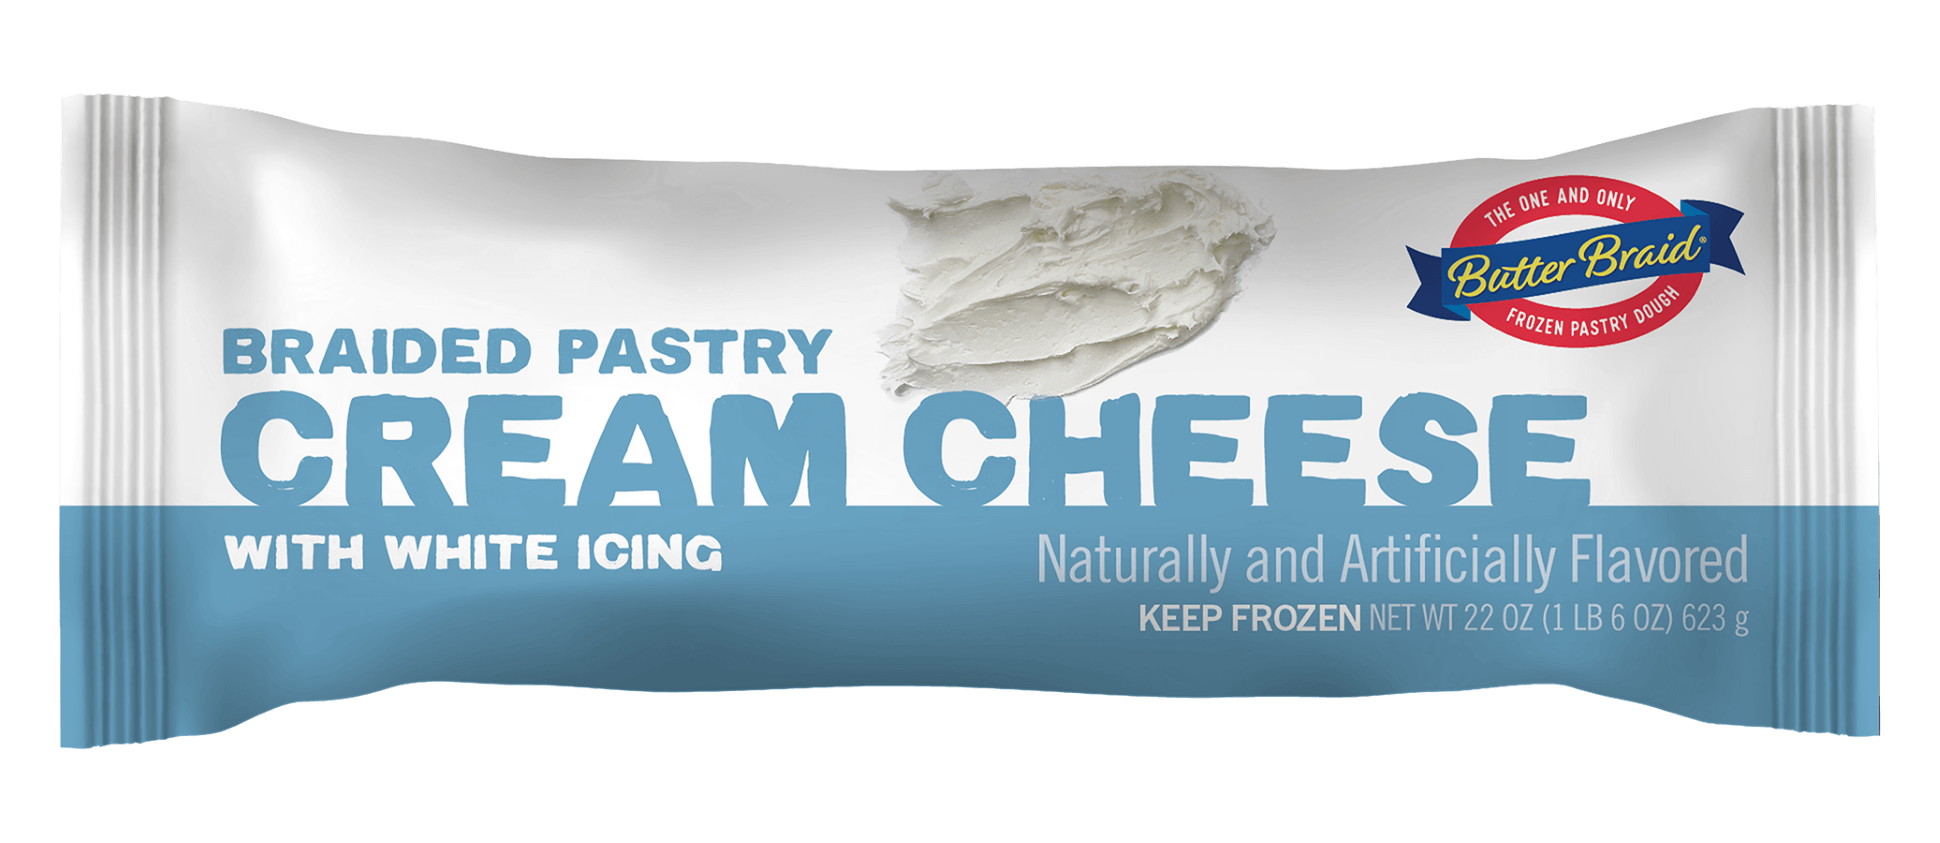 Cream Cheese Pastry packaging